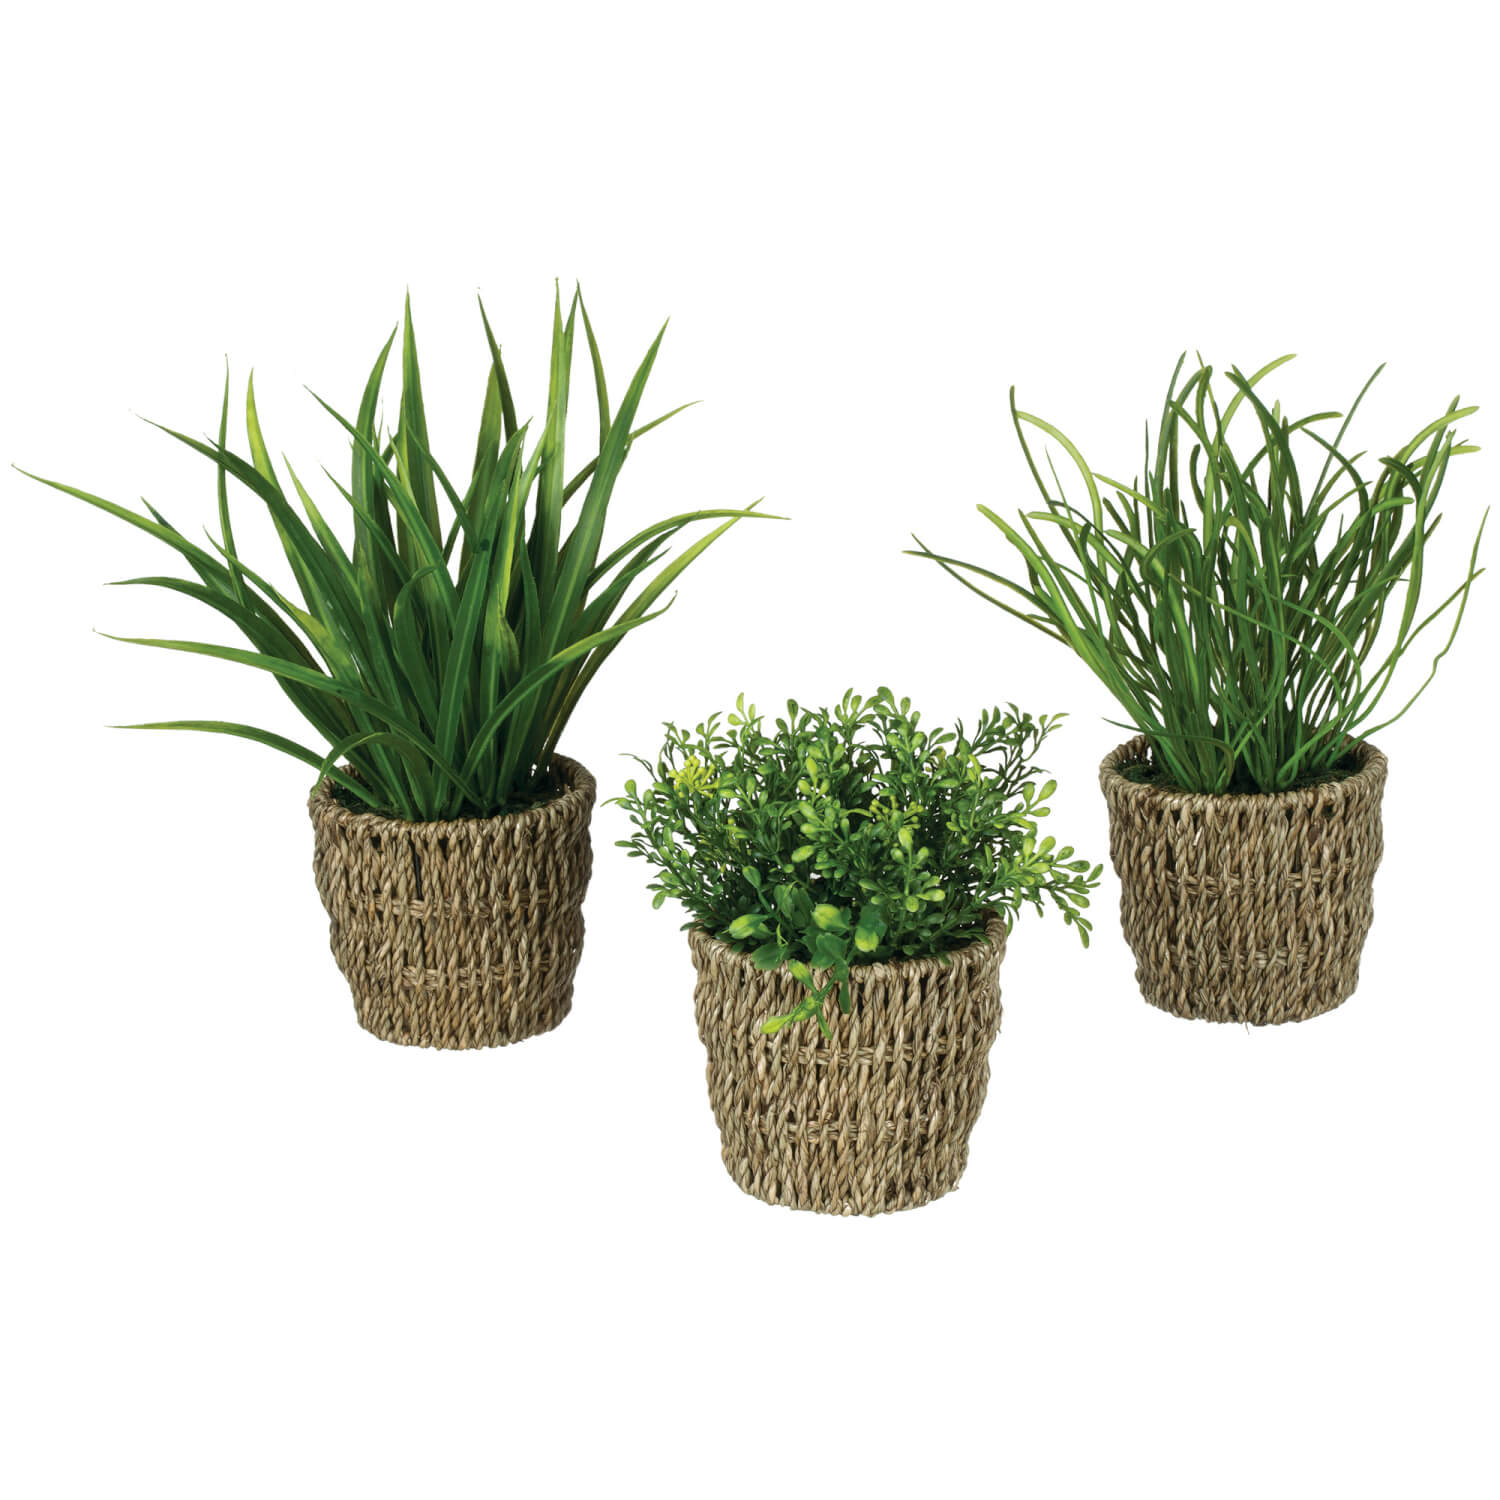 Potted Foliage in Basket